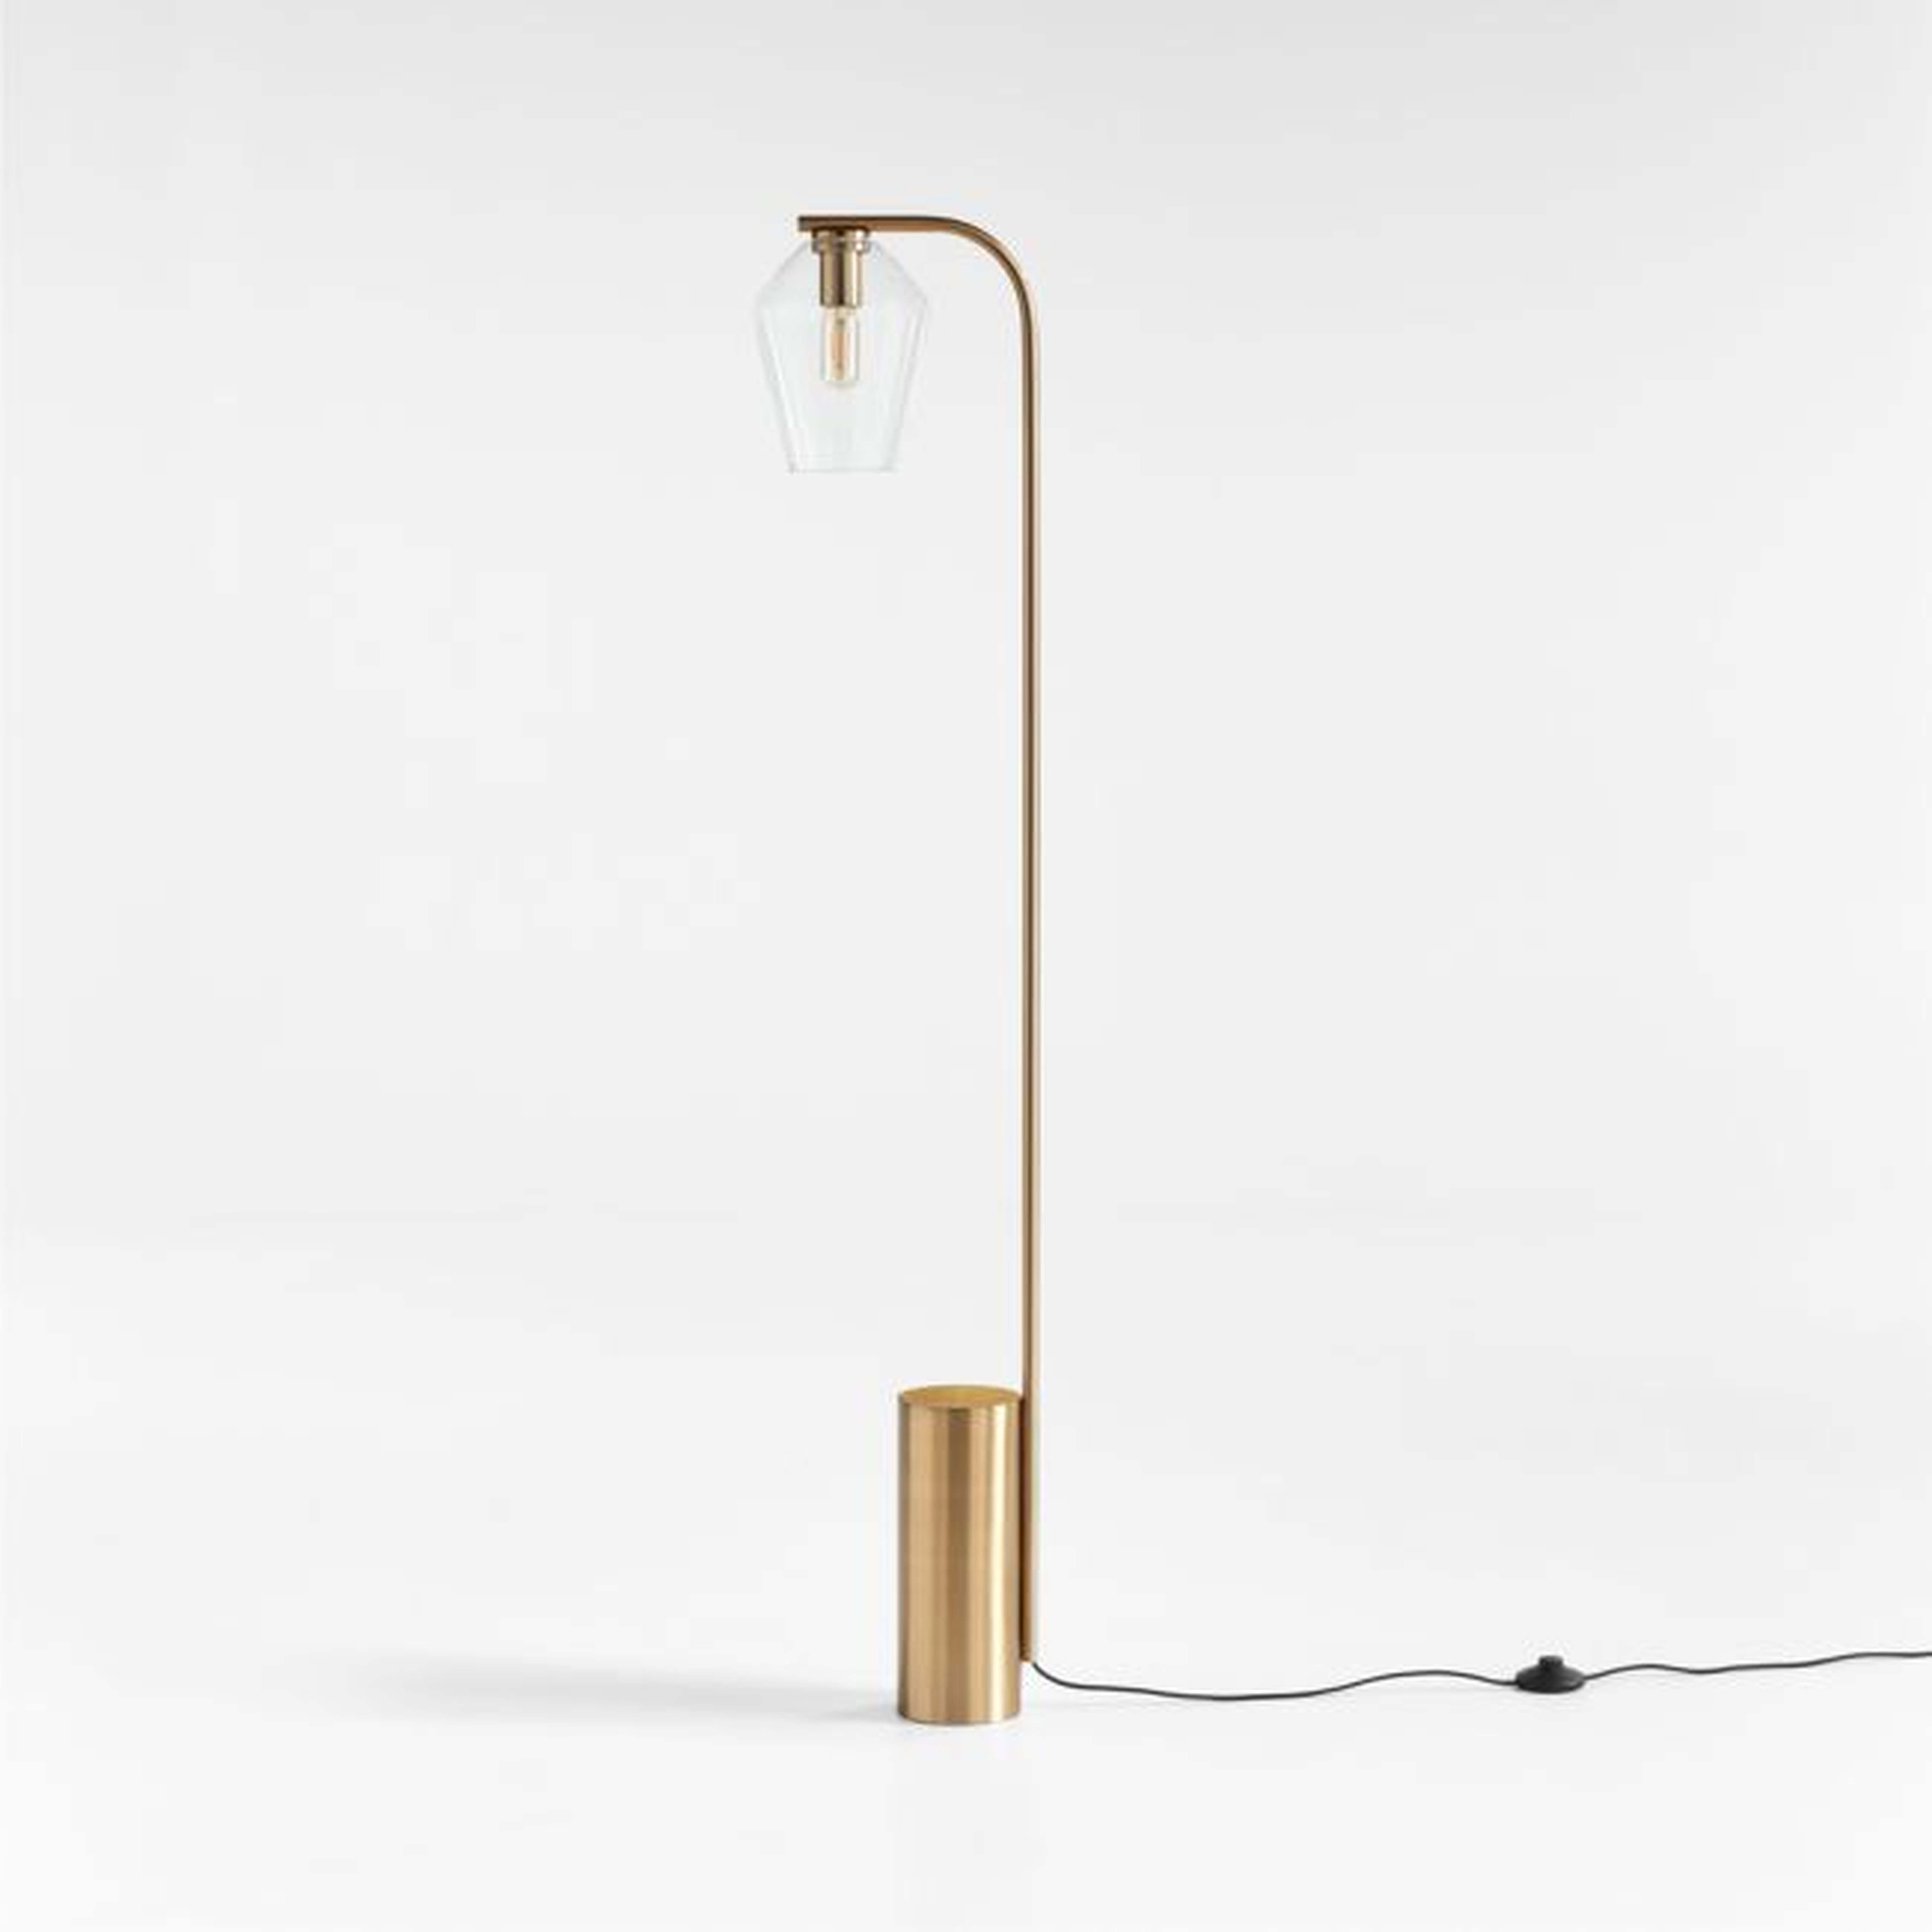 Arren Brass Floor Lamp with Clear Angled Shade - Crate and Barrel